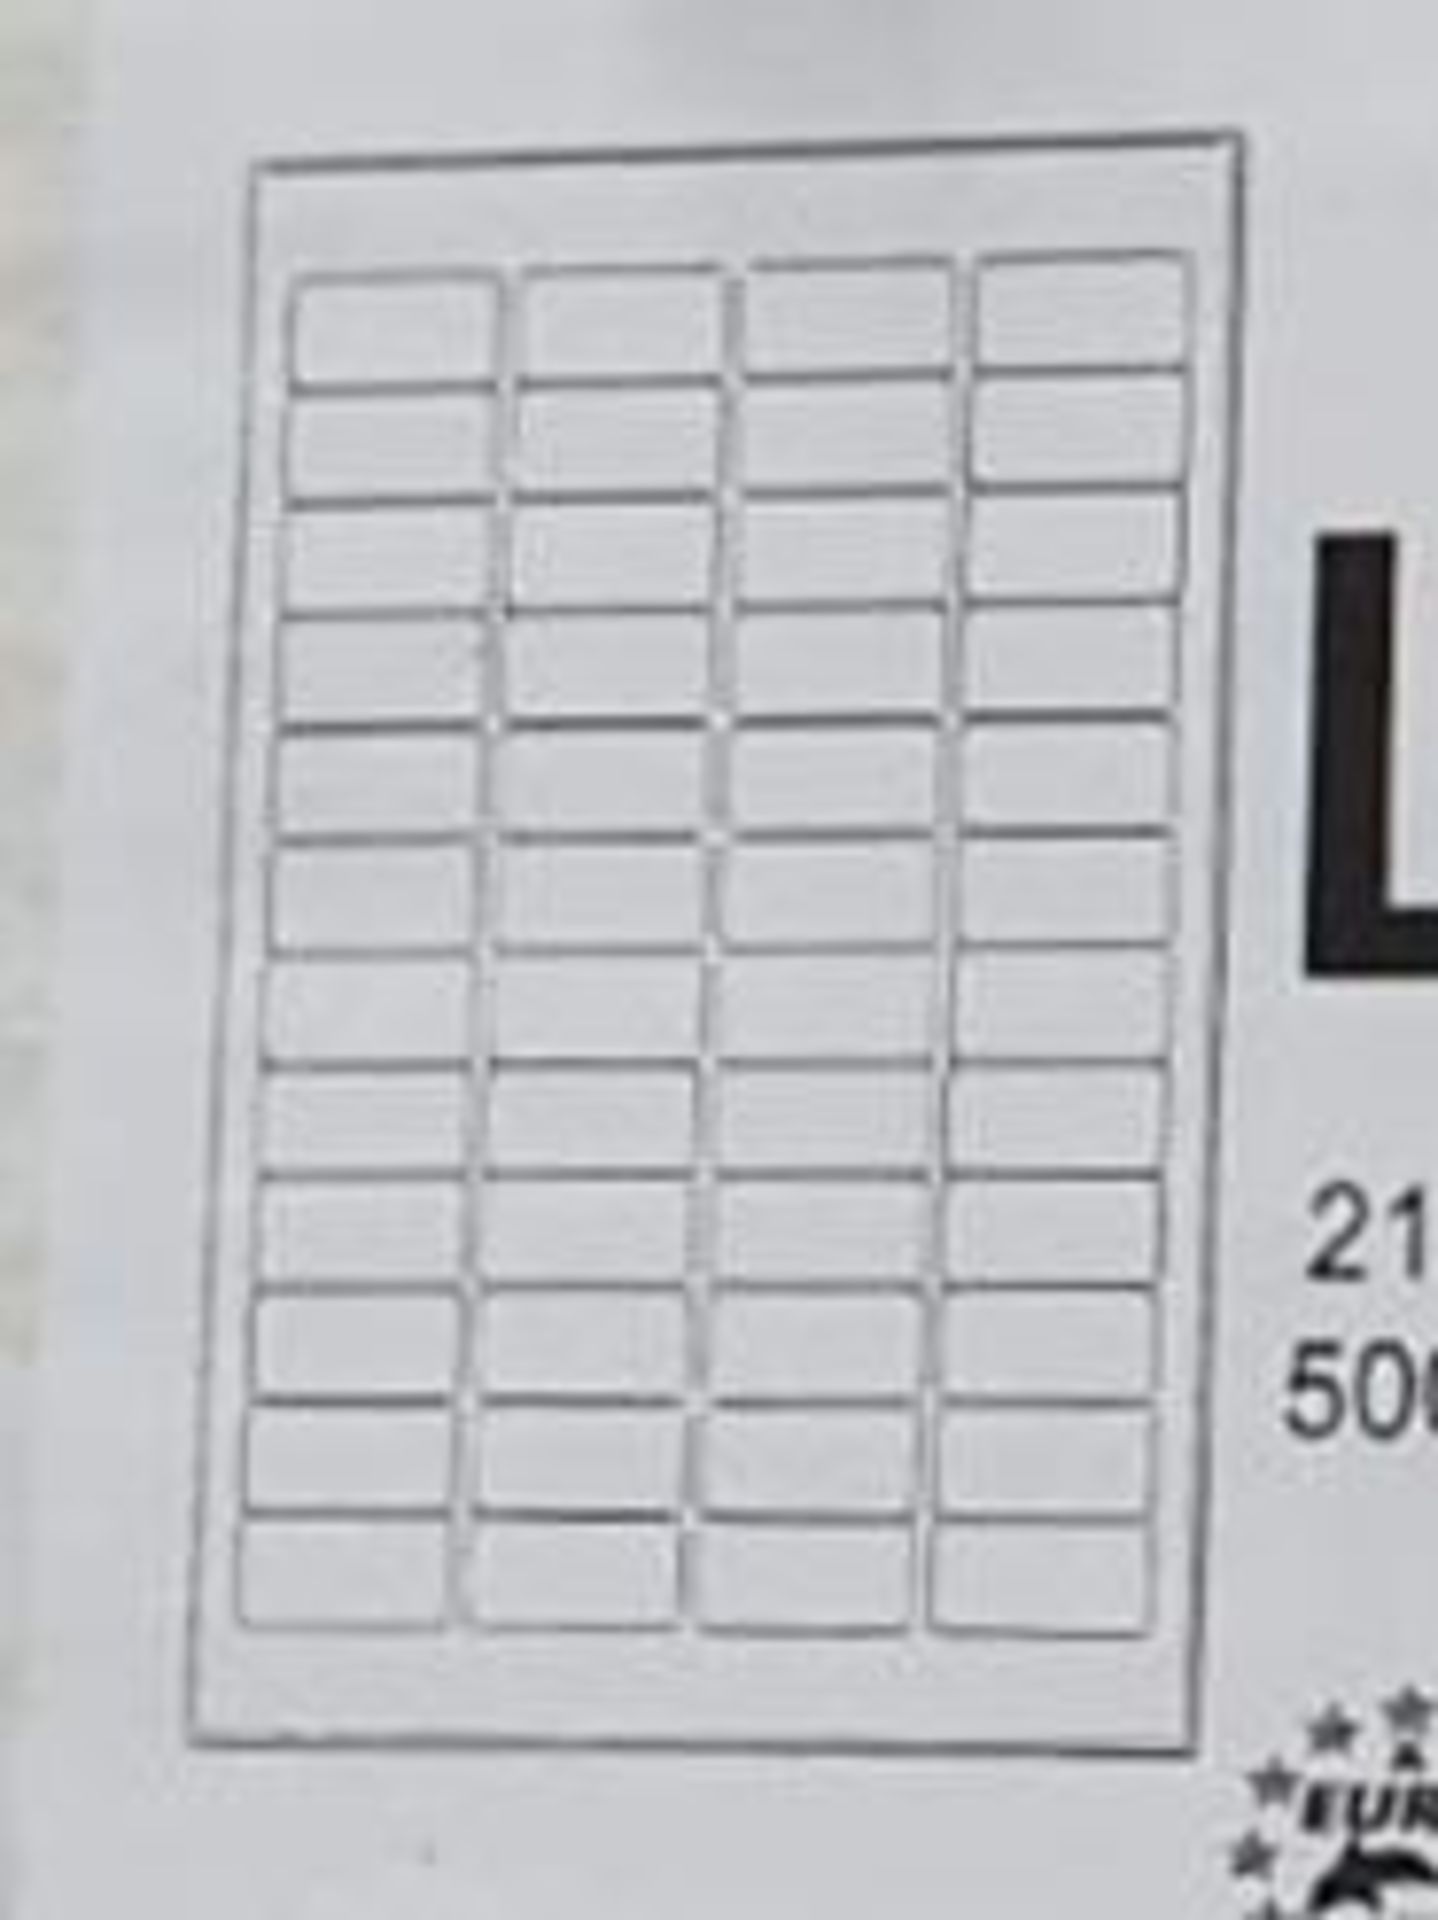 4 x Boxes Of LL48 Mini Adress Labels (2000 Sheets) - Unused Boxed Stock - Low Start, No Reserve